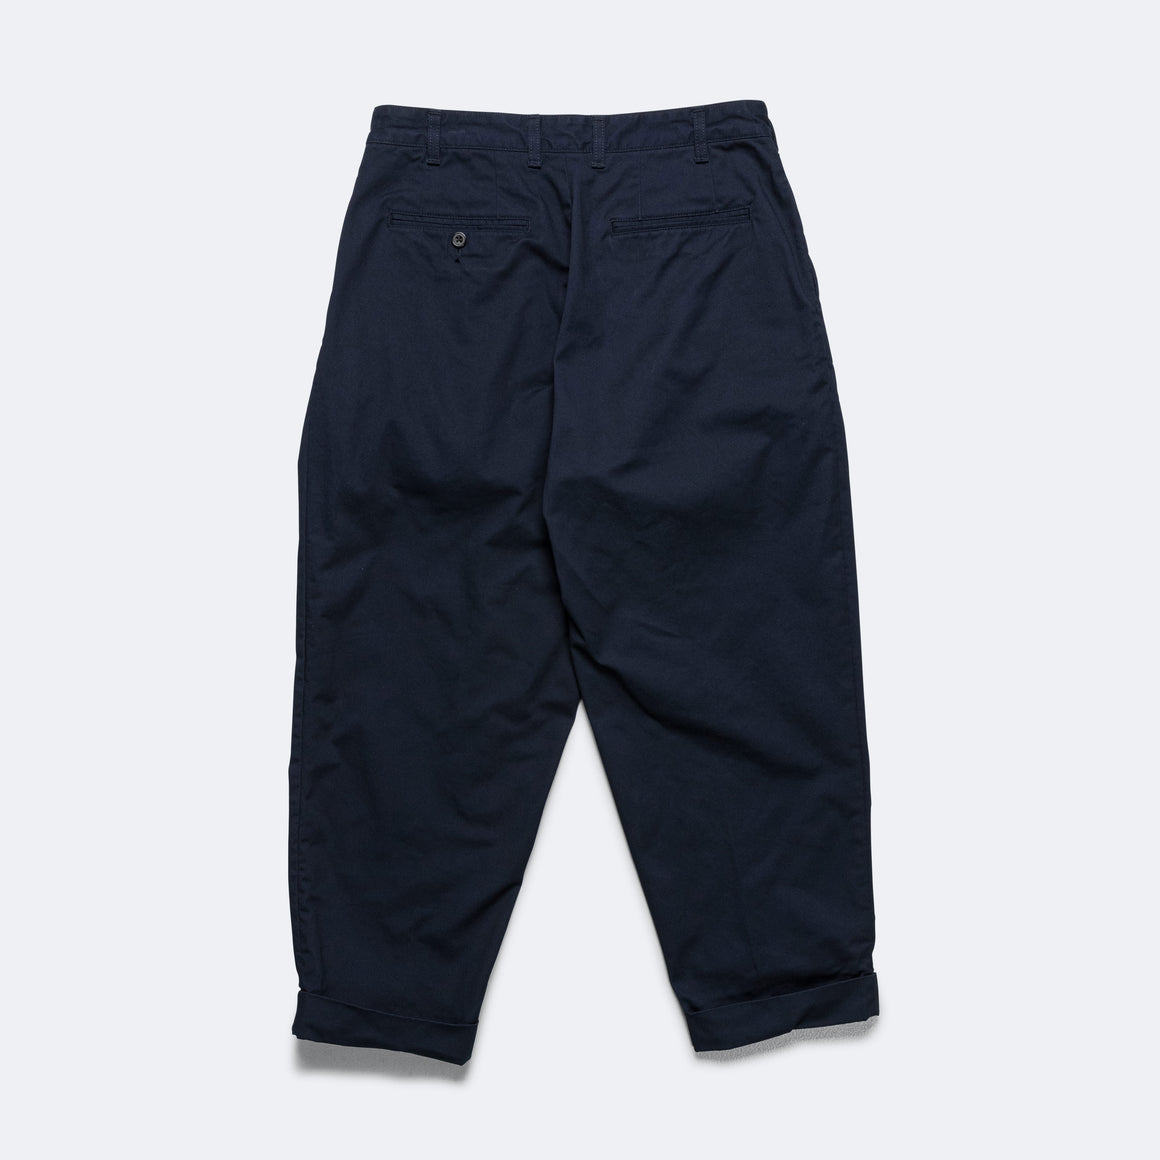 Beams Plus - 2 Pleat Twill Pants - Navy - UP THERE